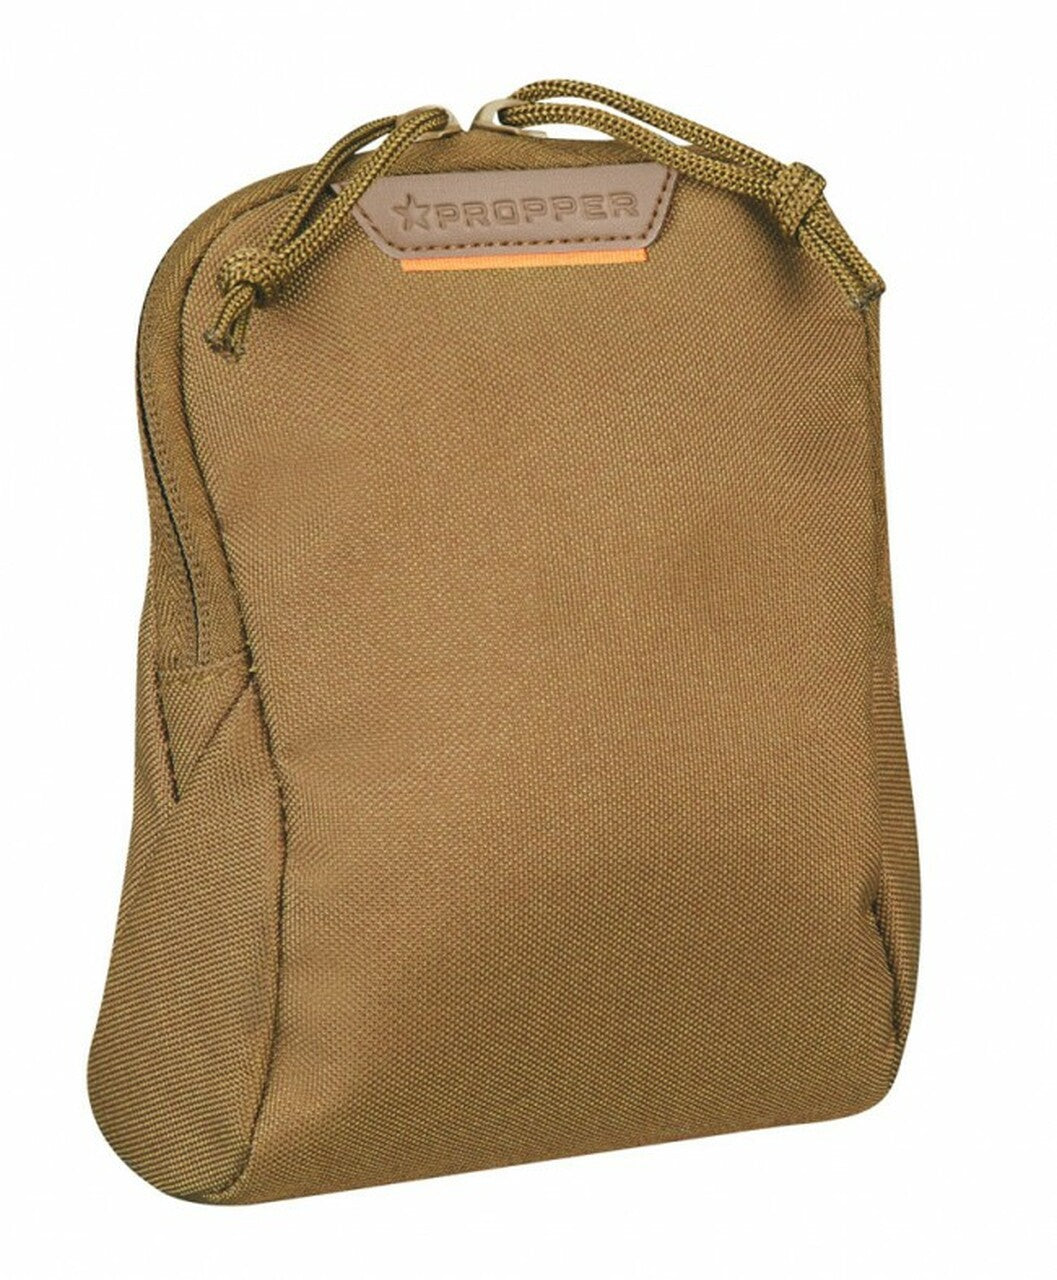 7 x 6" MOLLE Media Pouch